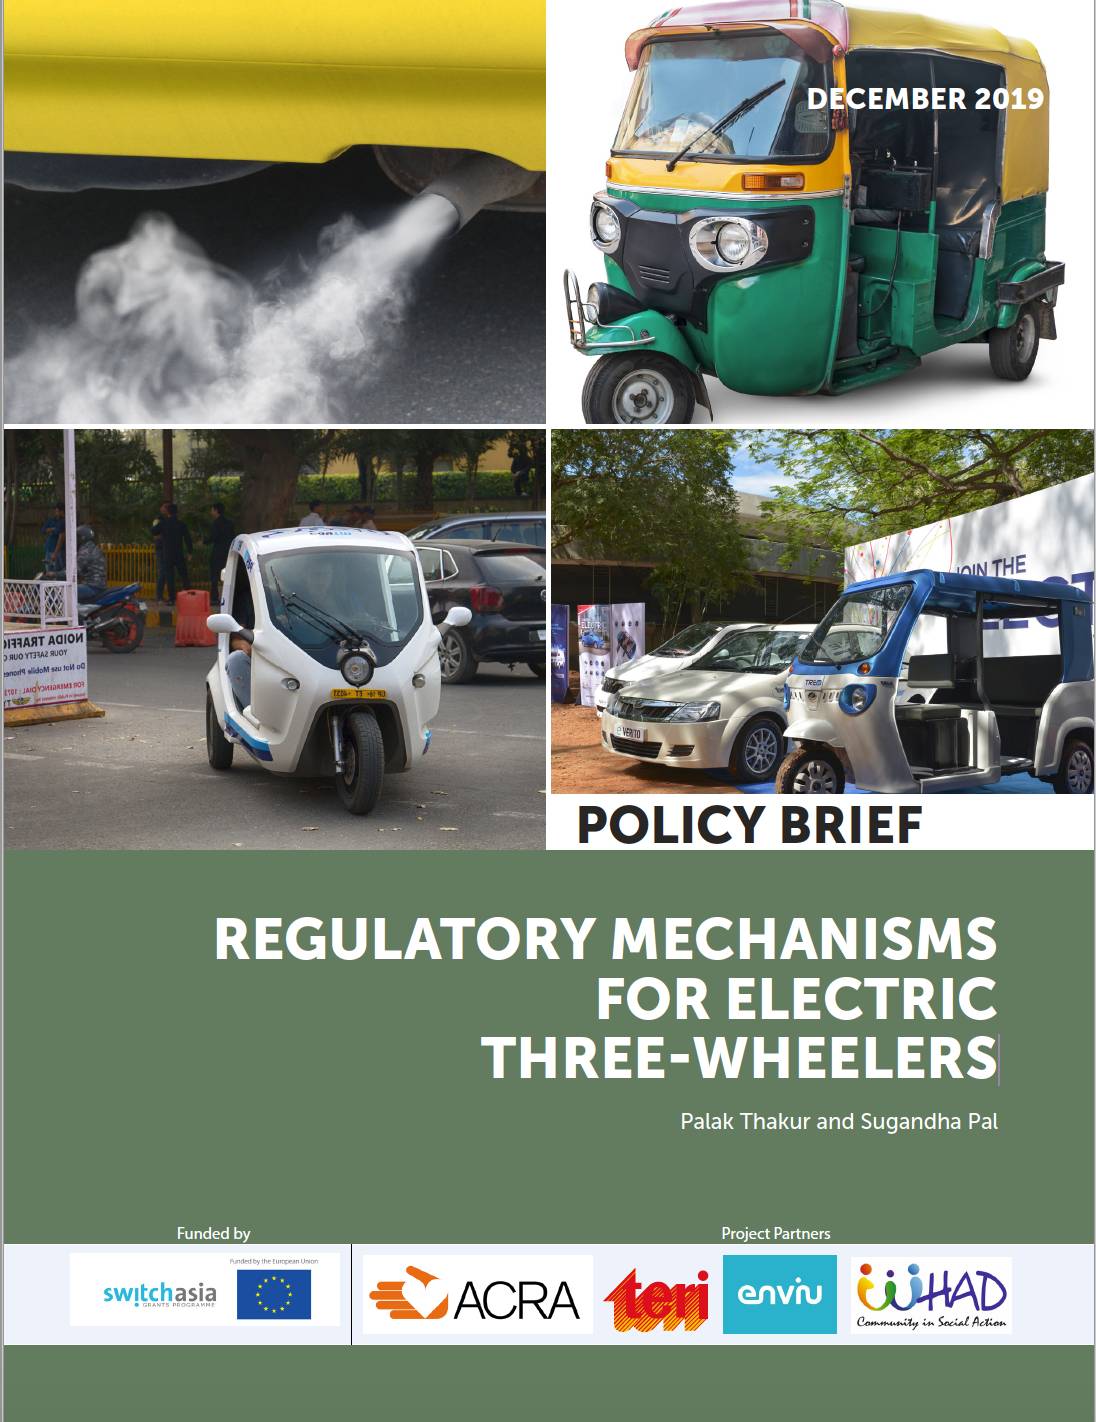 Policy Brief: Regulatory Mechanisms for Electric Three - Wheelers